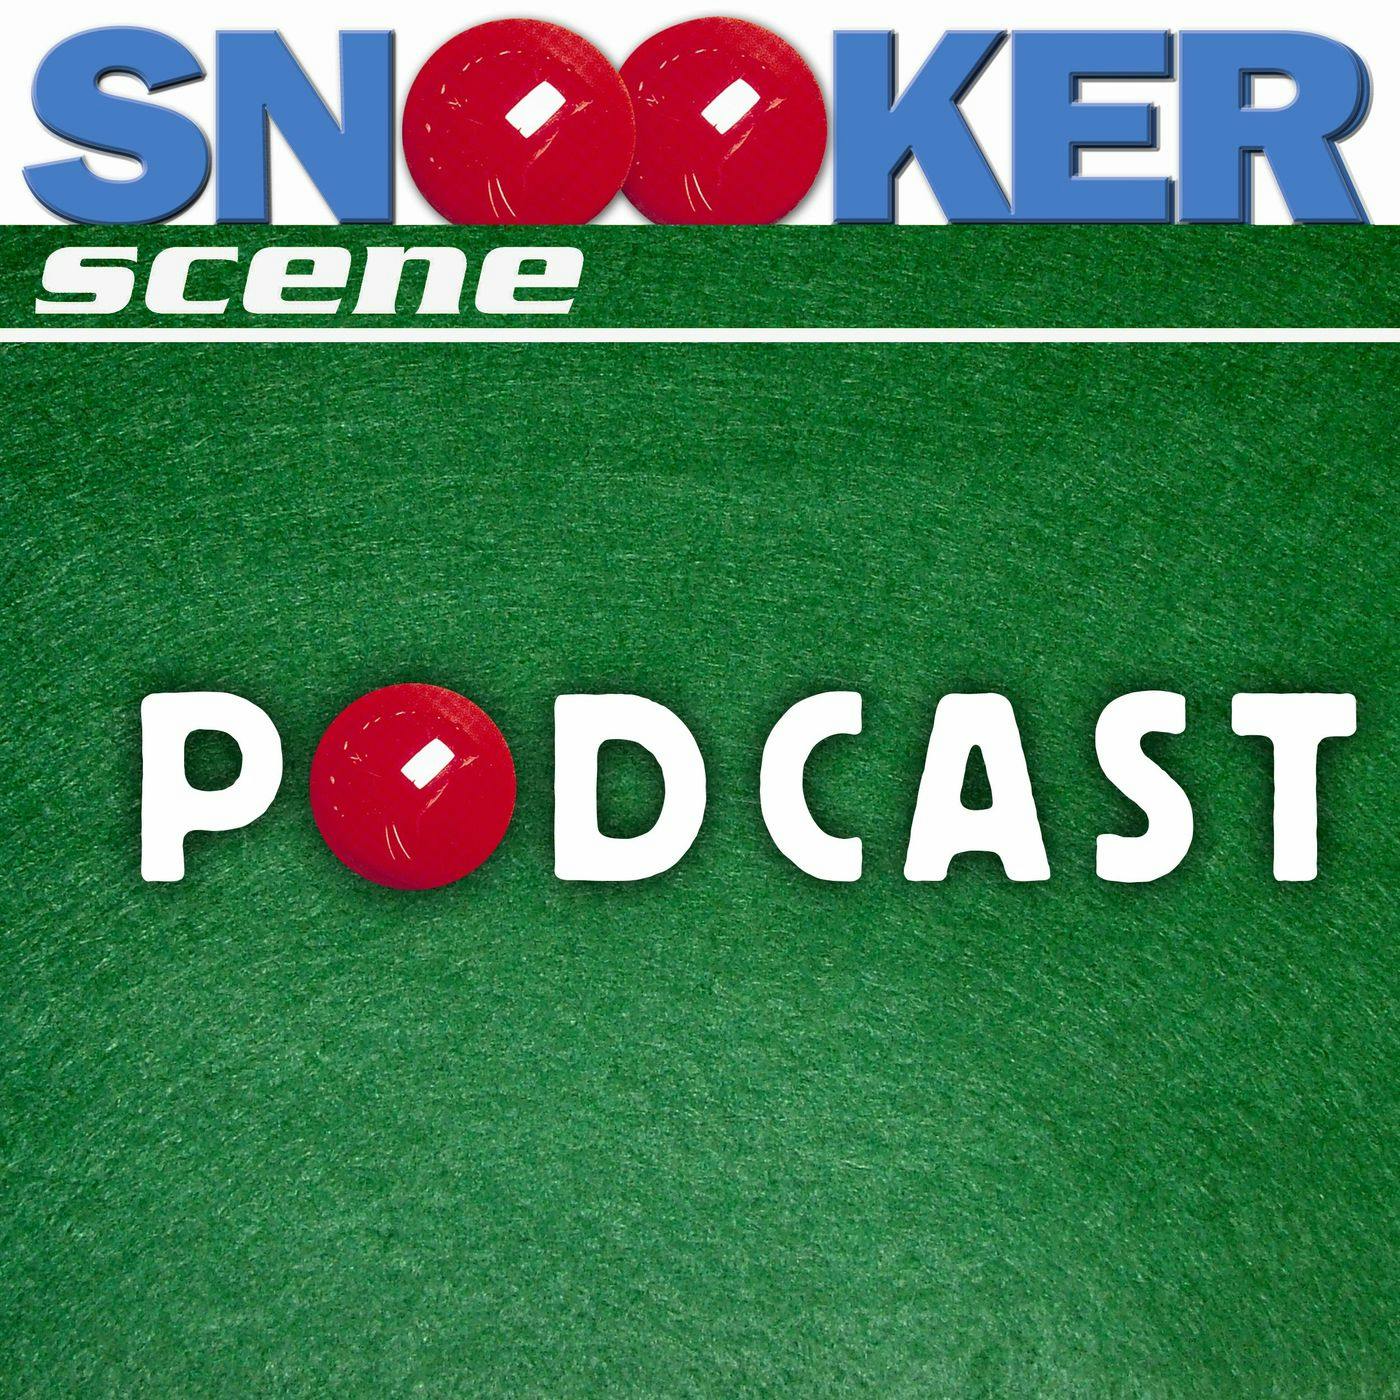 Snooker Scene Podcast episode 132 - Building the Perfect Snooker Player